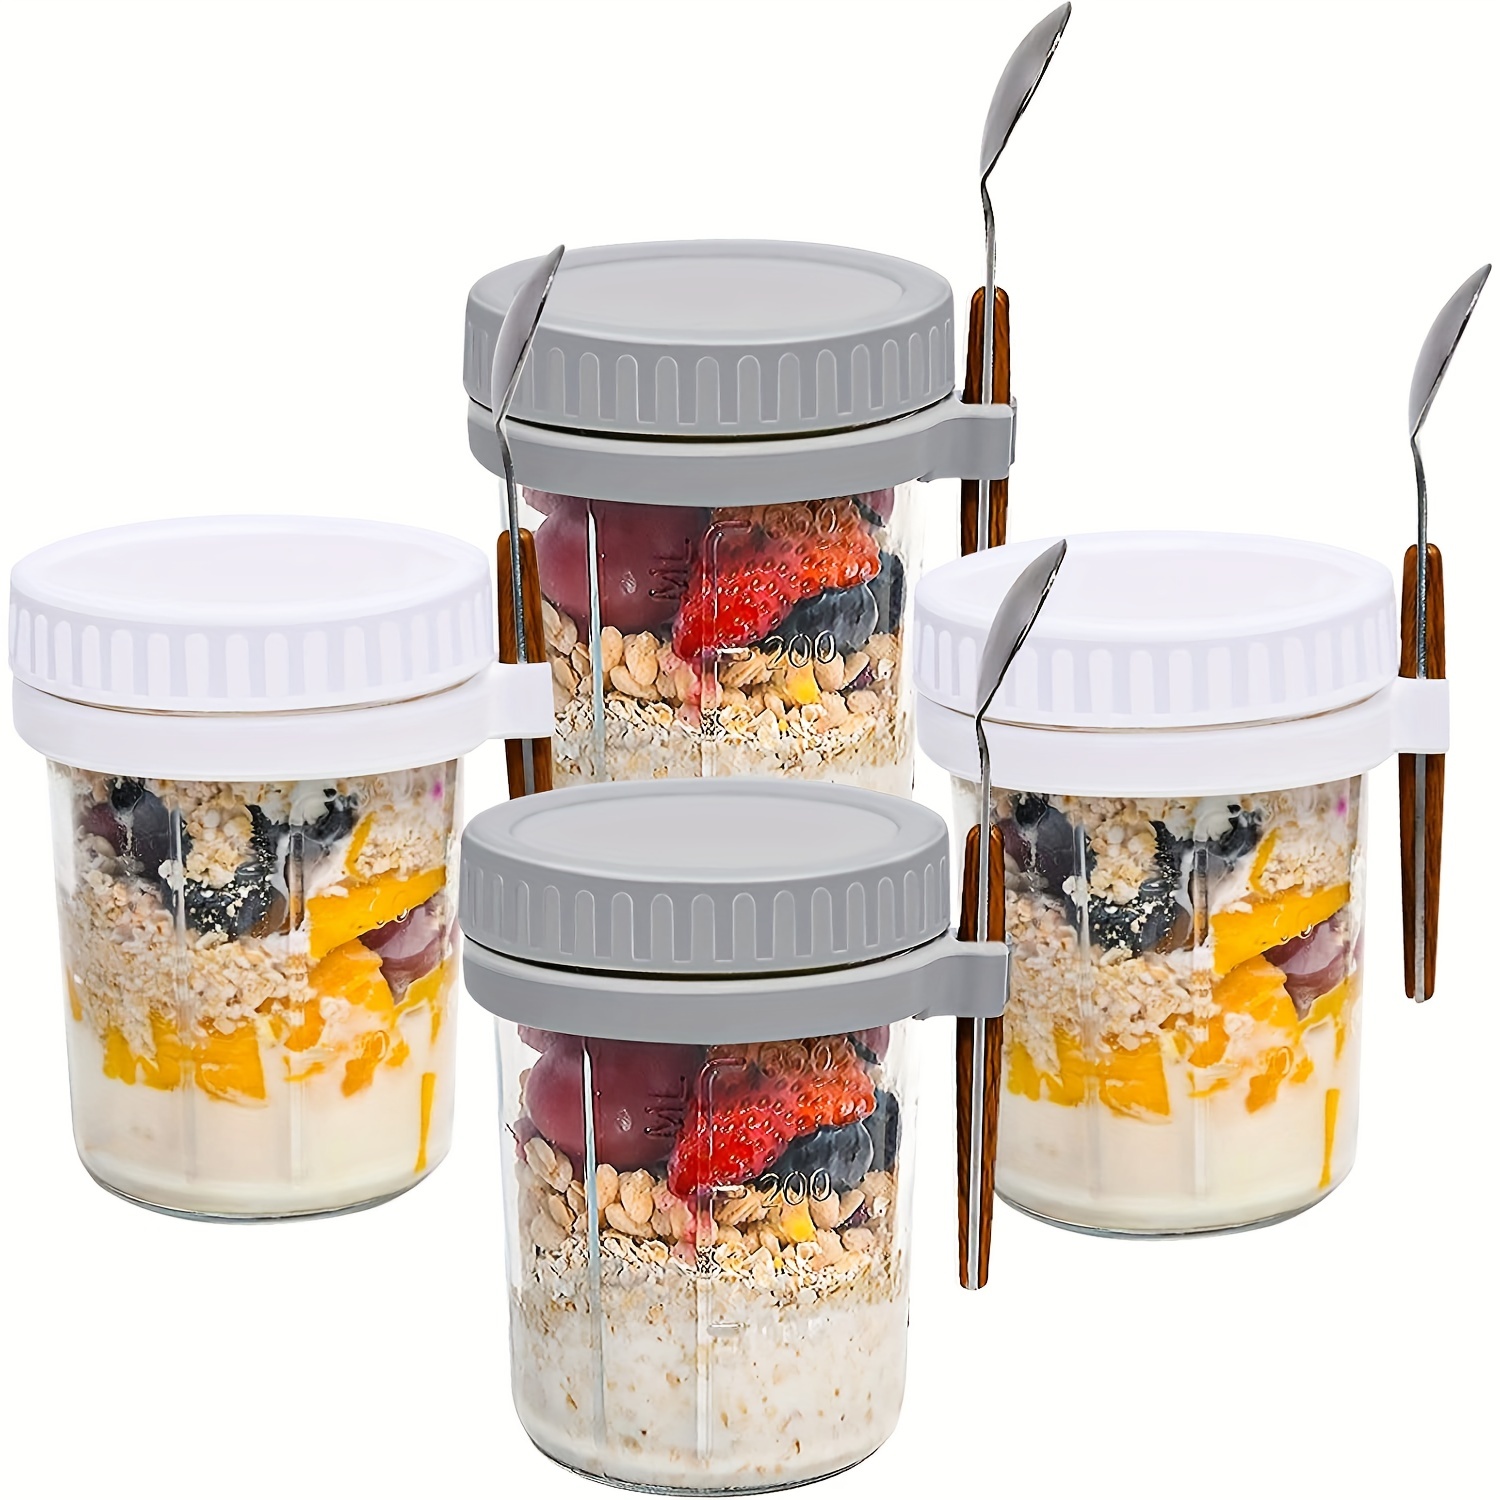 SUMELA Overnight Oats Containers With Lids & Spoon, Meal Prep